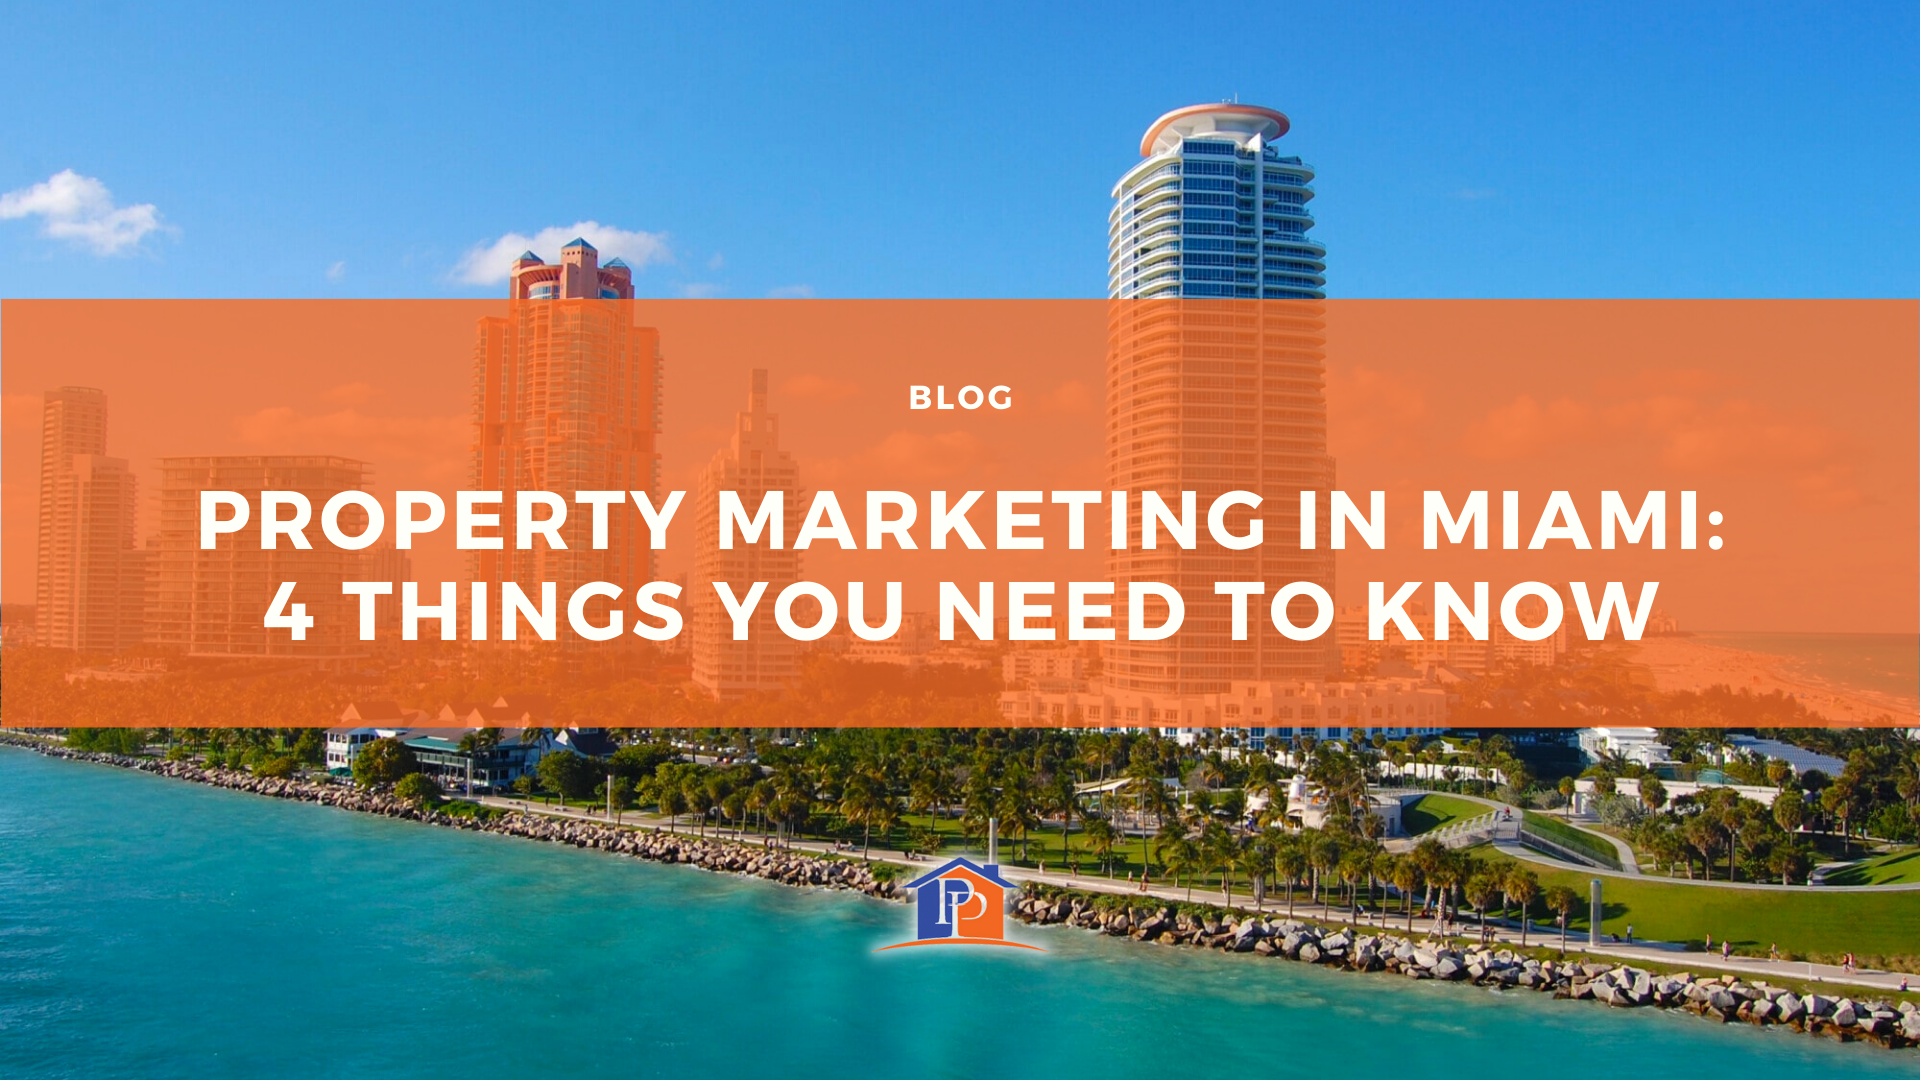 Property Marketing in Miami: 4 Things You Need to Know